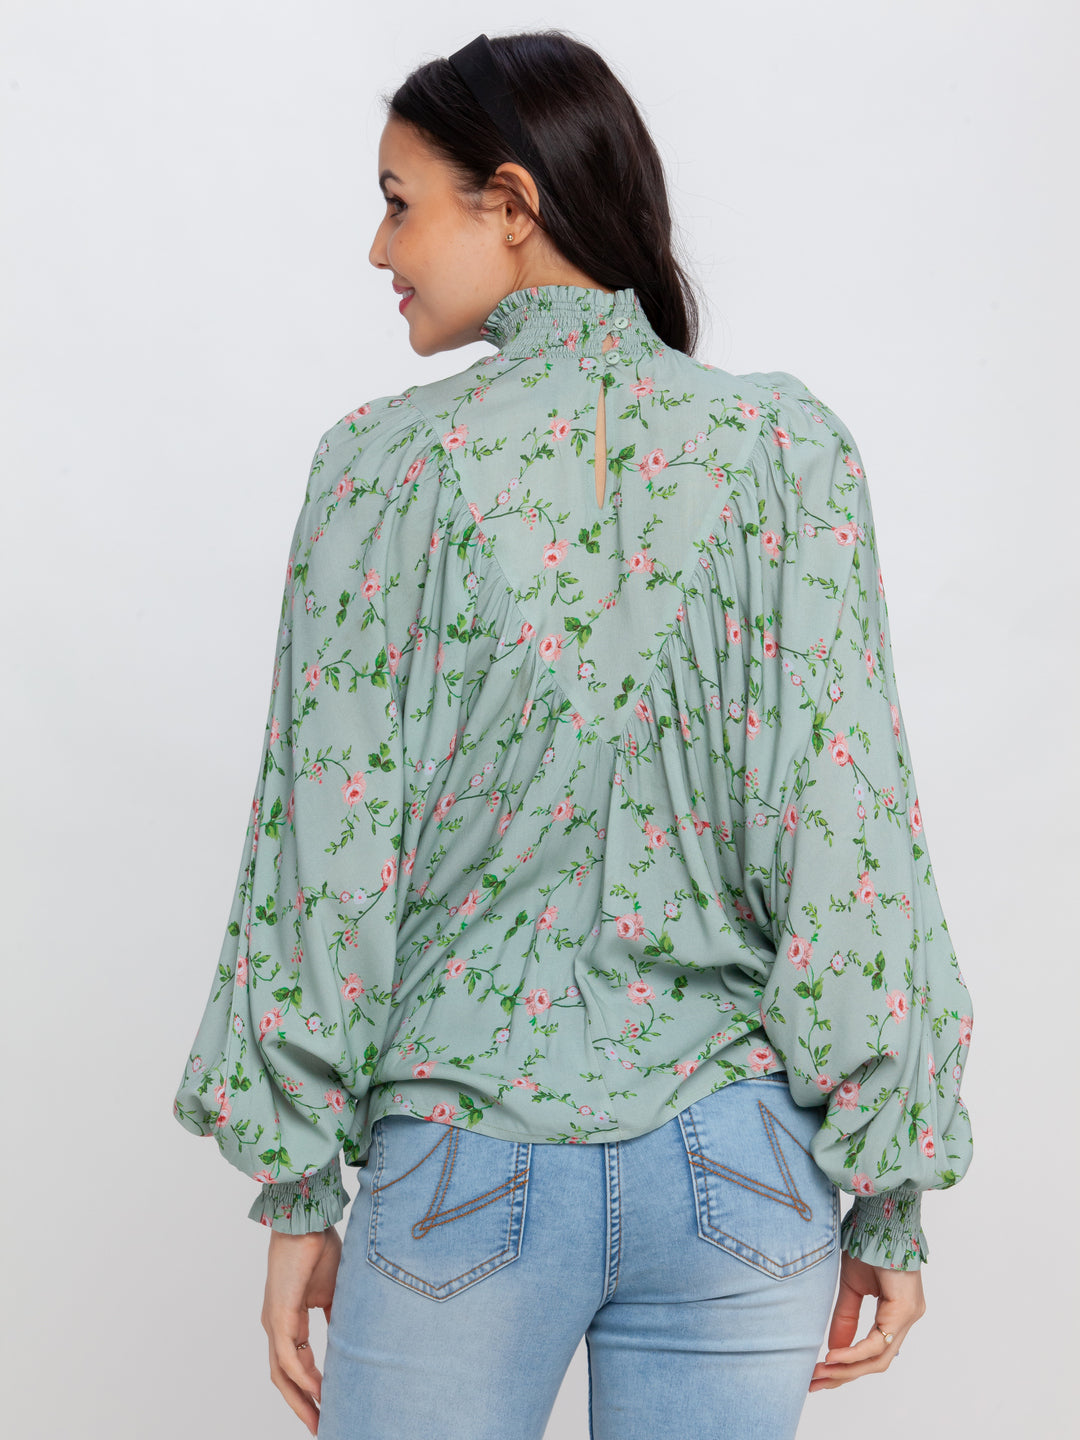 Green Printed Top For Women